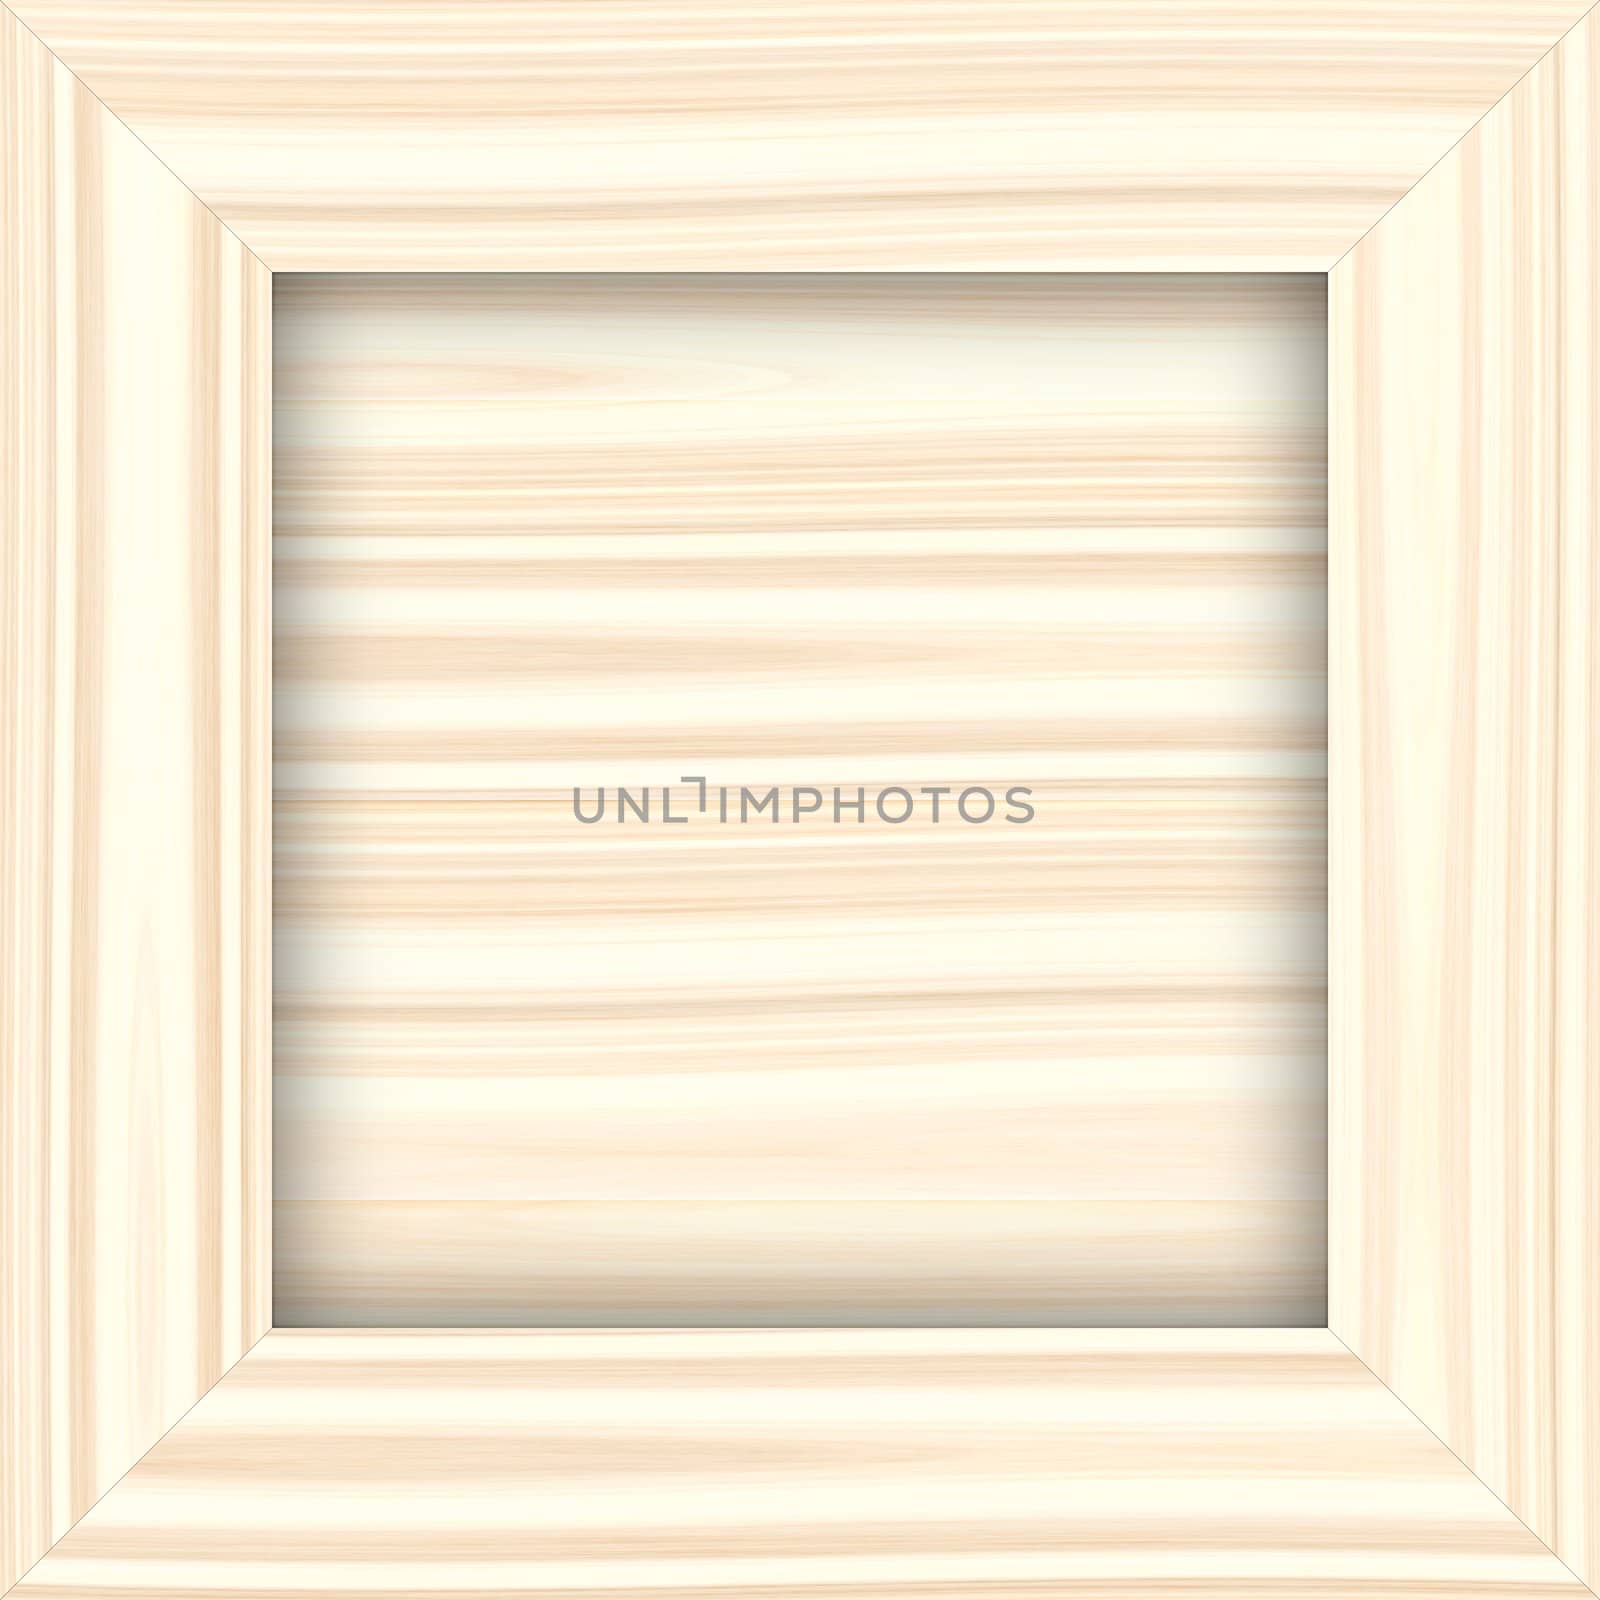 square structured frame in light wood color